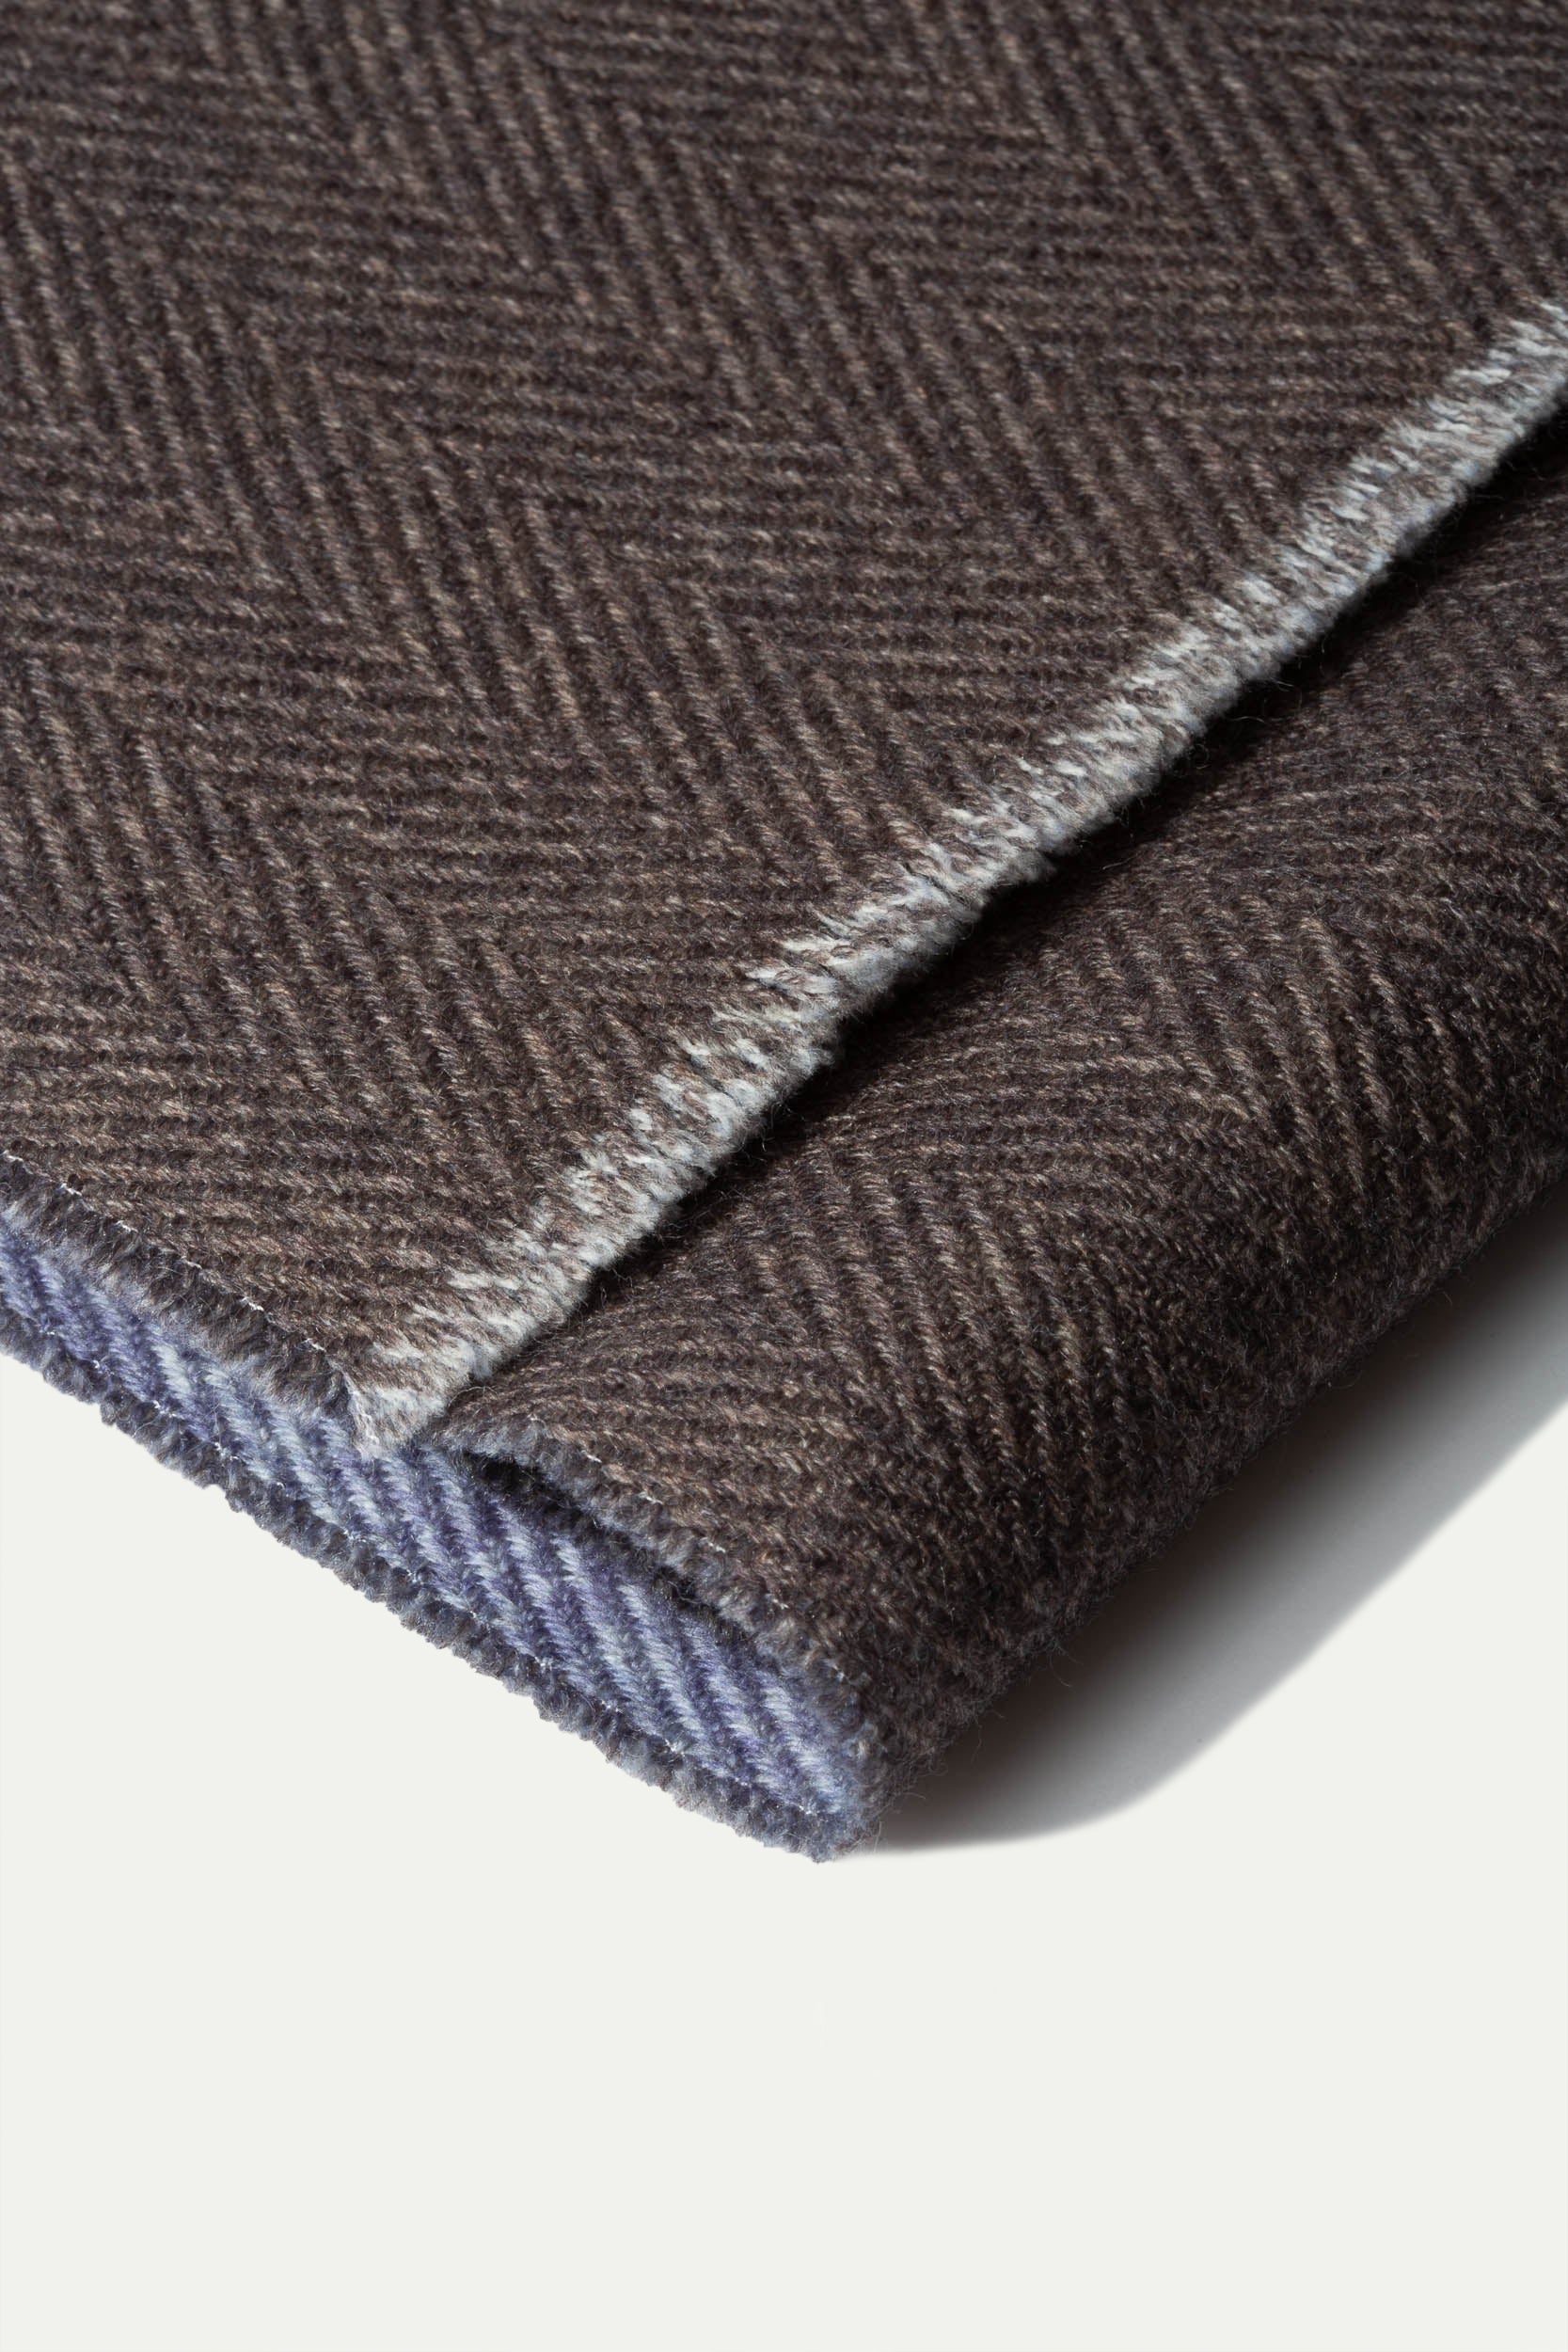 Brown and light blue reversible herringbone scarf - Made in Italy